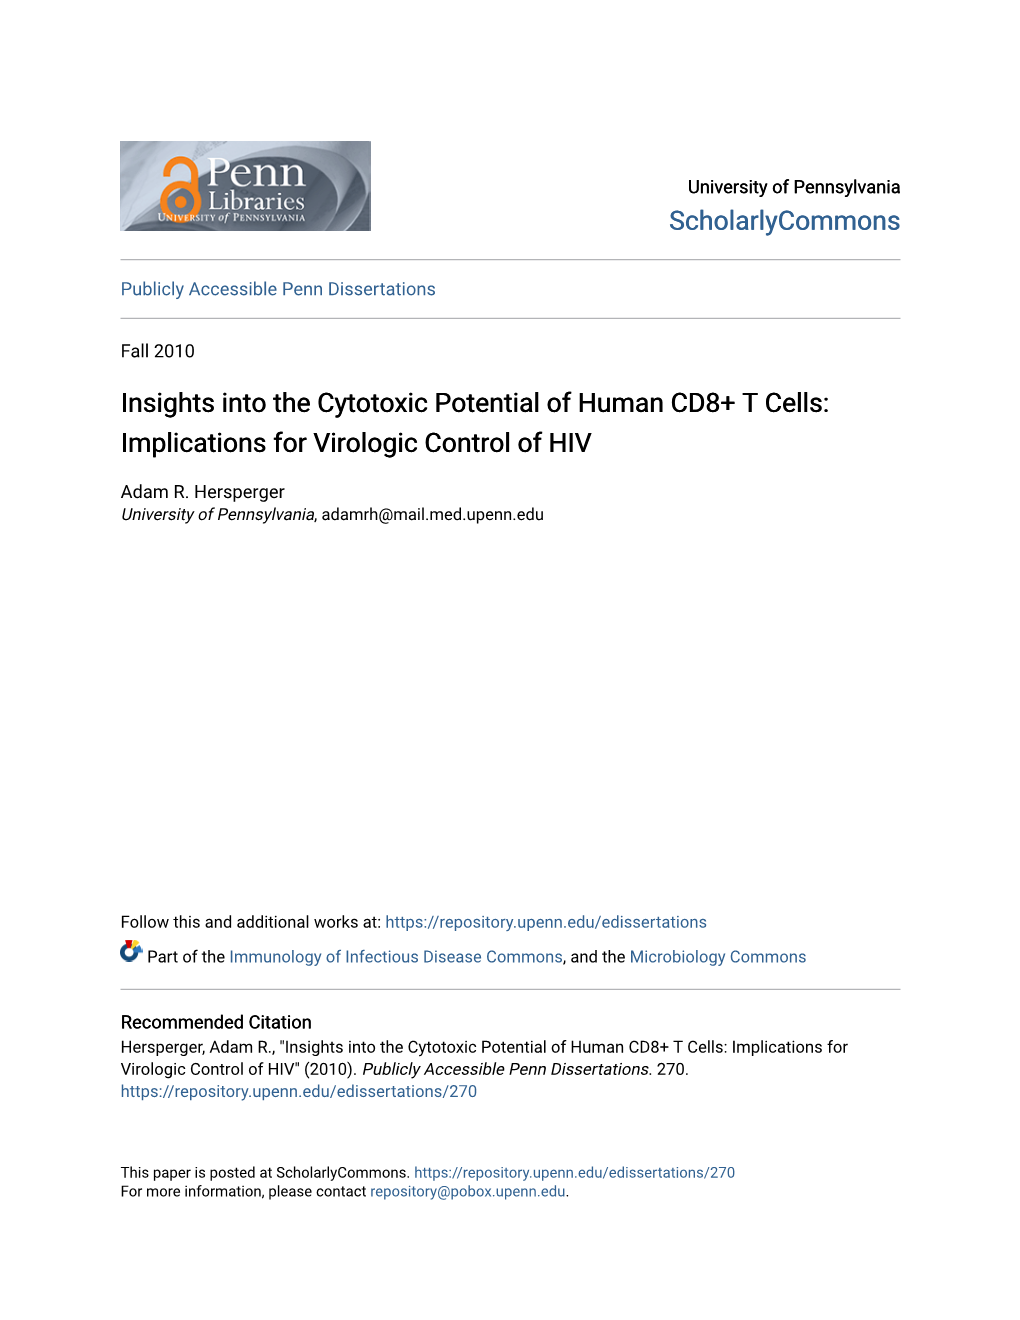 Insights Into the Cytotoxic Potential of Human CD8+ T Cells: Implications for Virologic Control of HIV